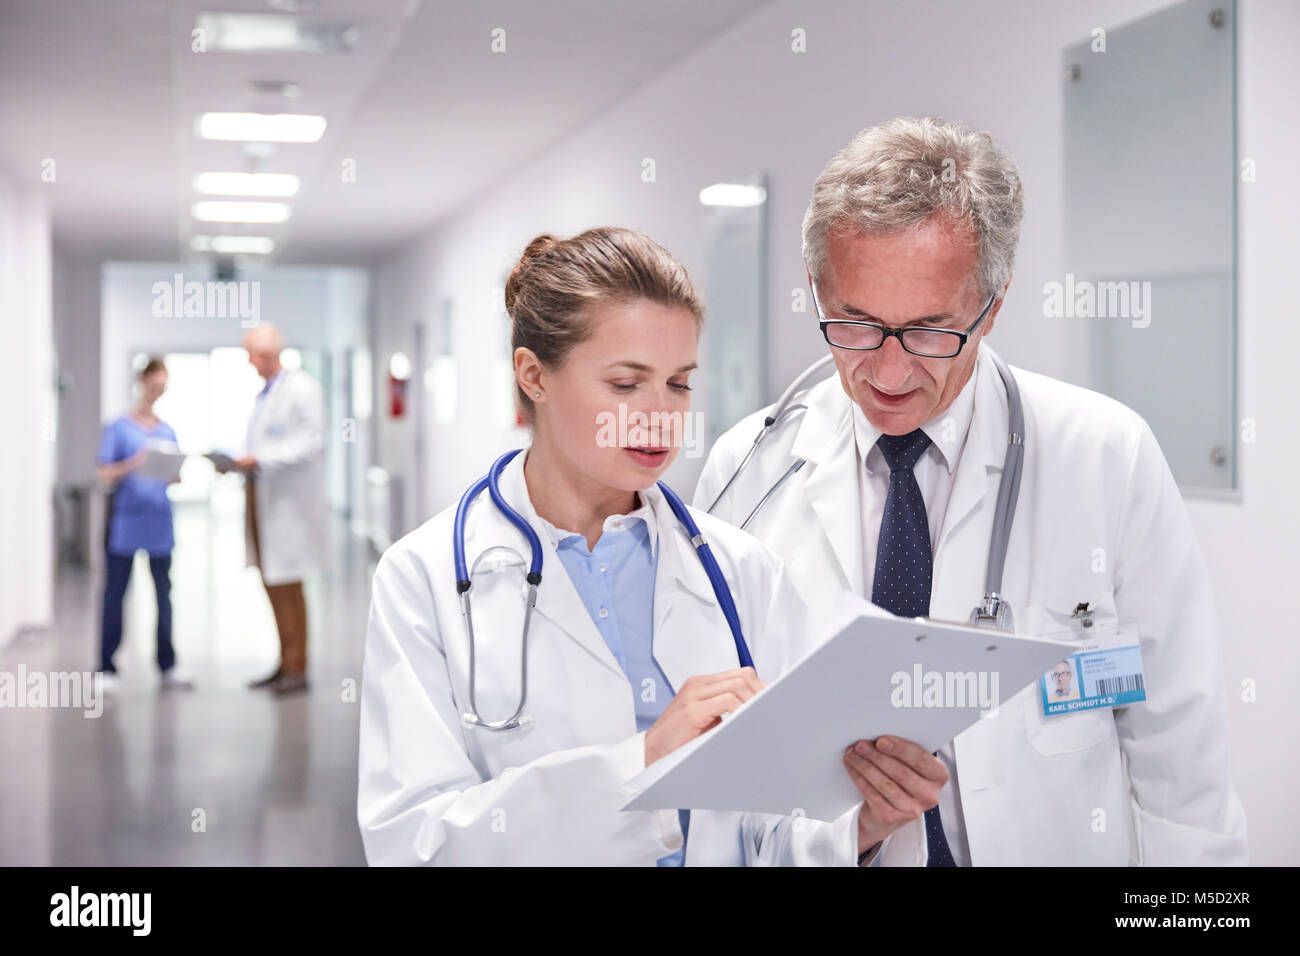 Doctors with clipboard making rounds, talking in hospital corridor Stock Photo